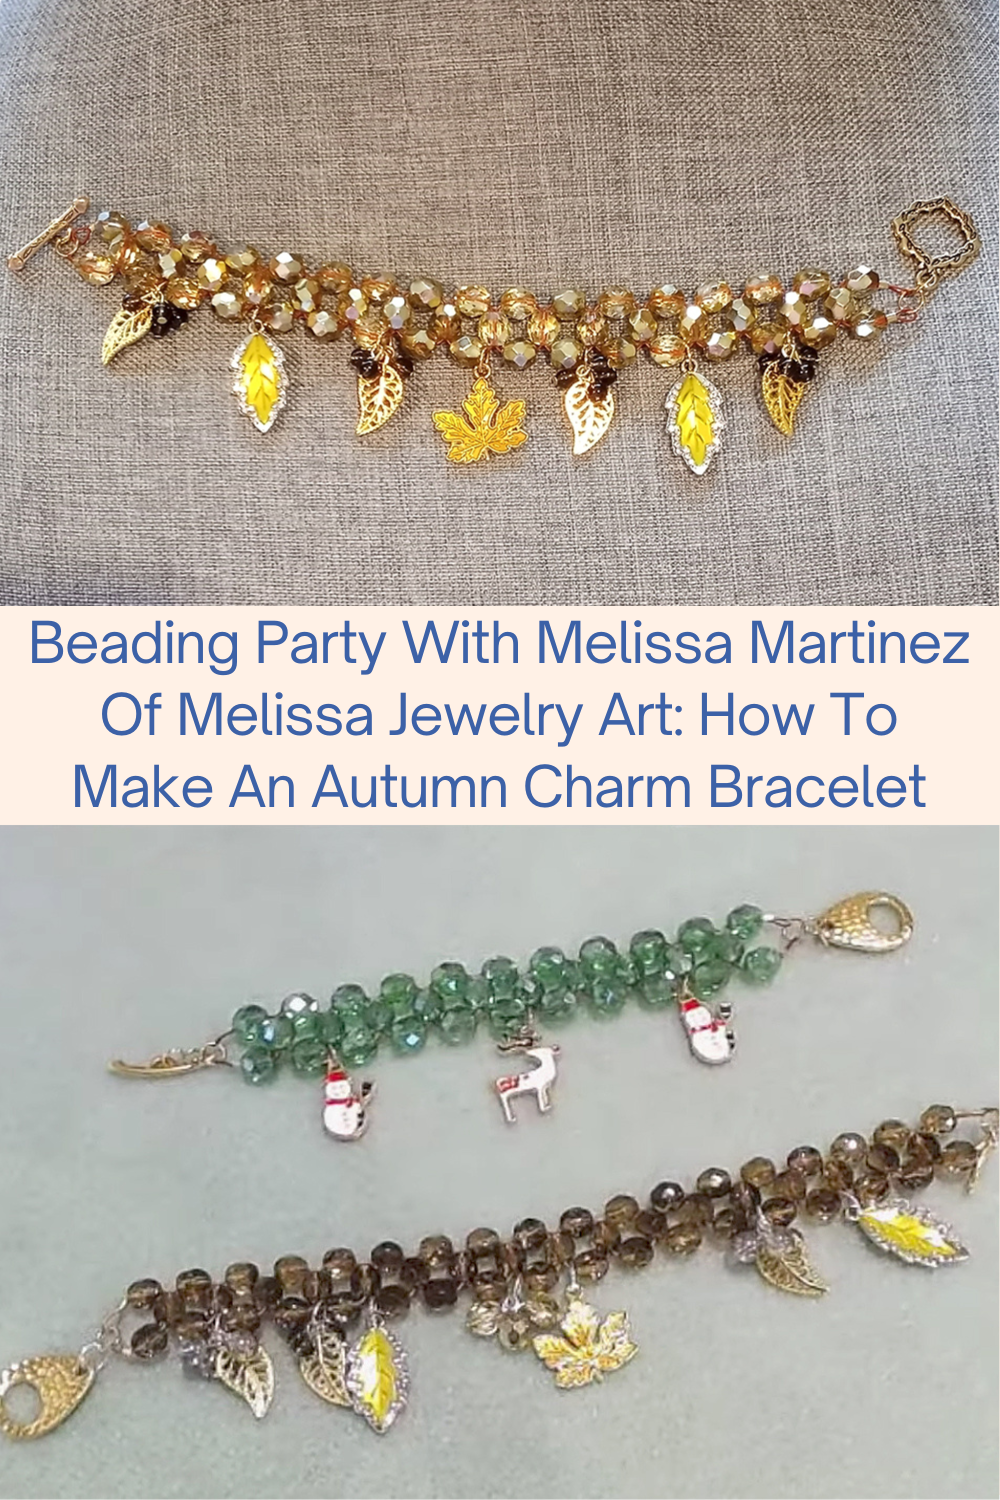 Beading Party With Melissa Martinez Of Melissa Jewelry Art How To Make An Autumn Charm Bracelet Collage